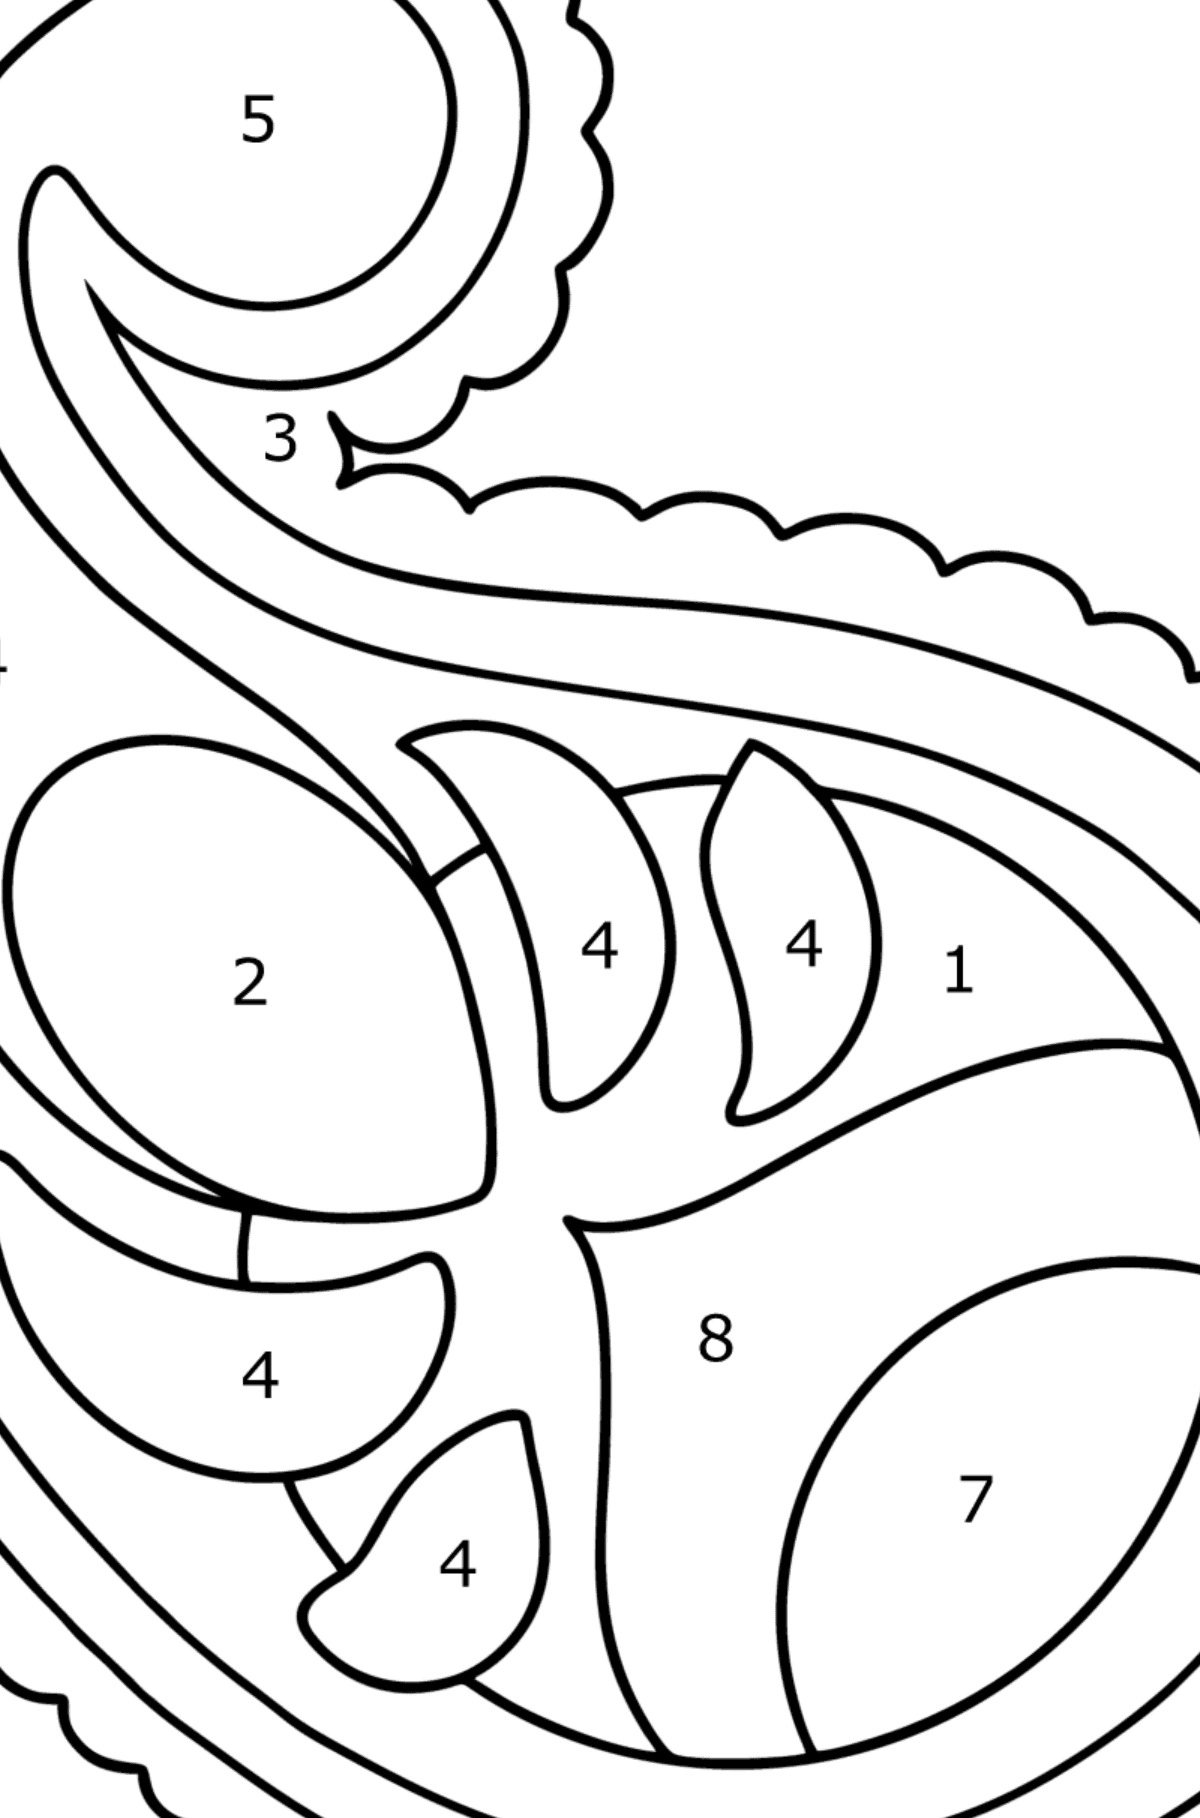 Paisley for Kids coloring page - Coloring by Numbers for Kids